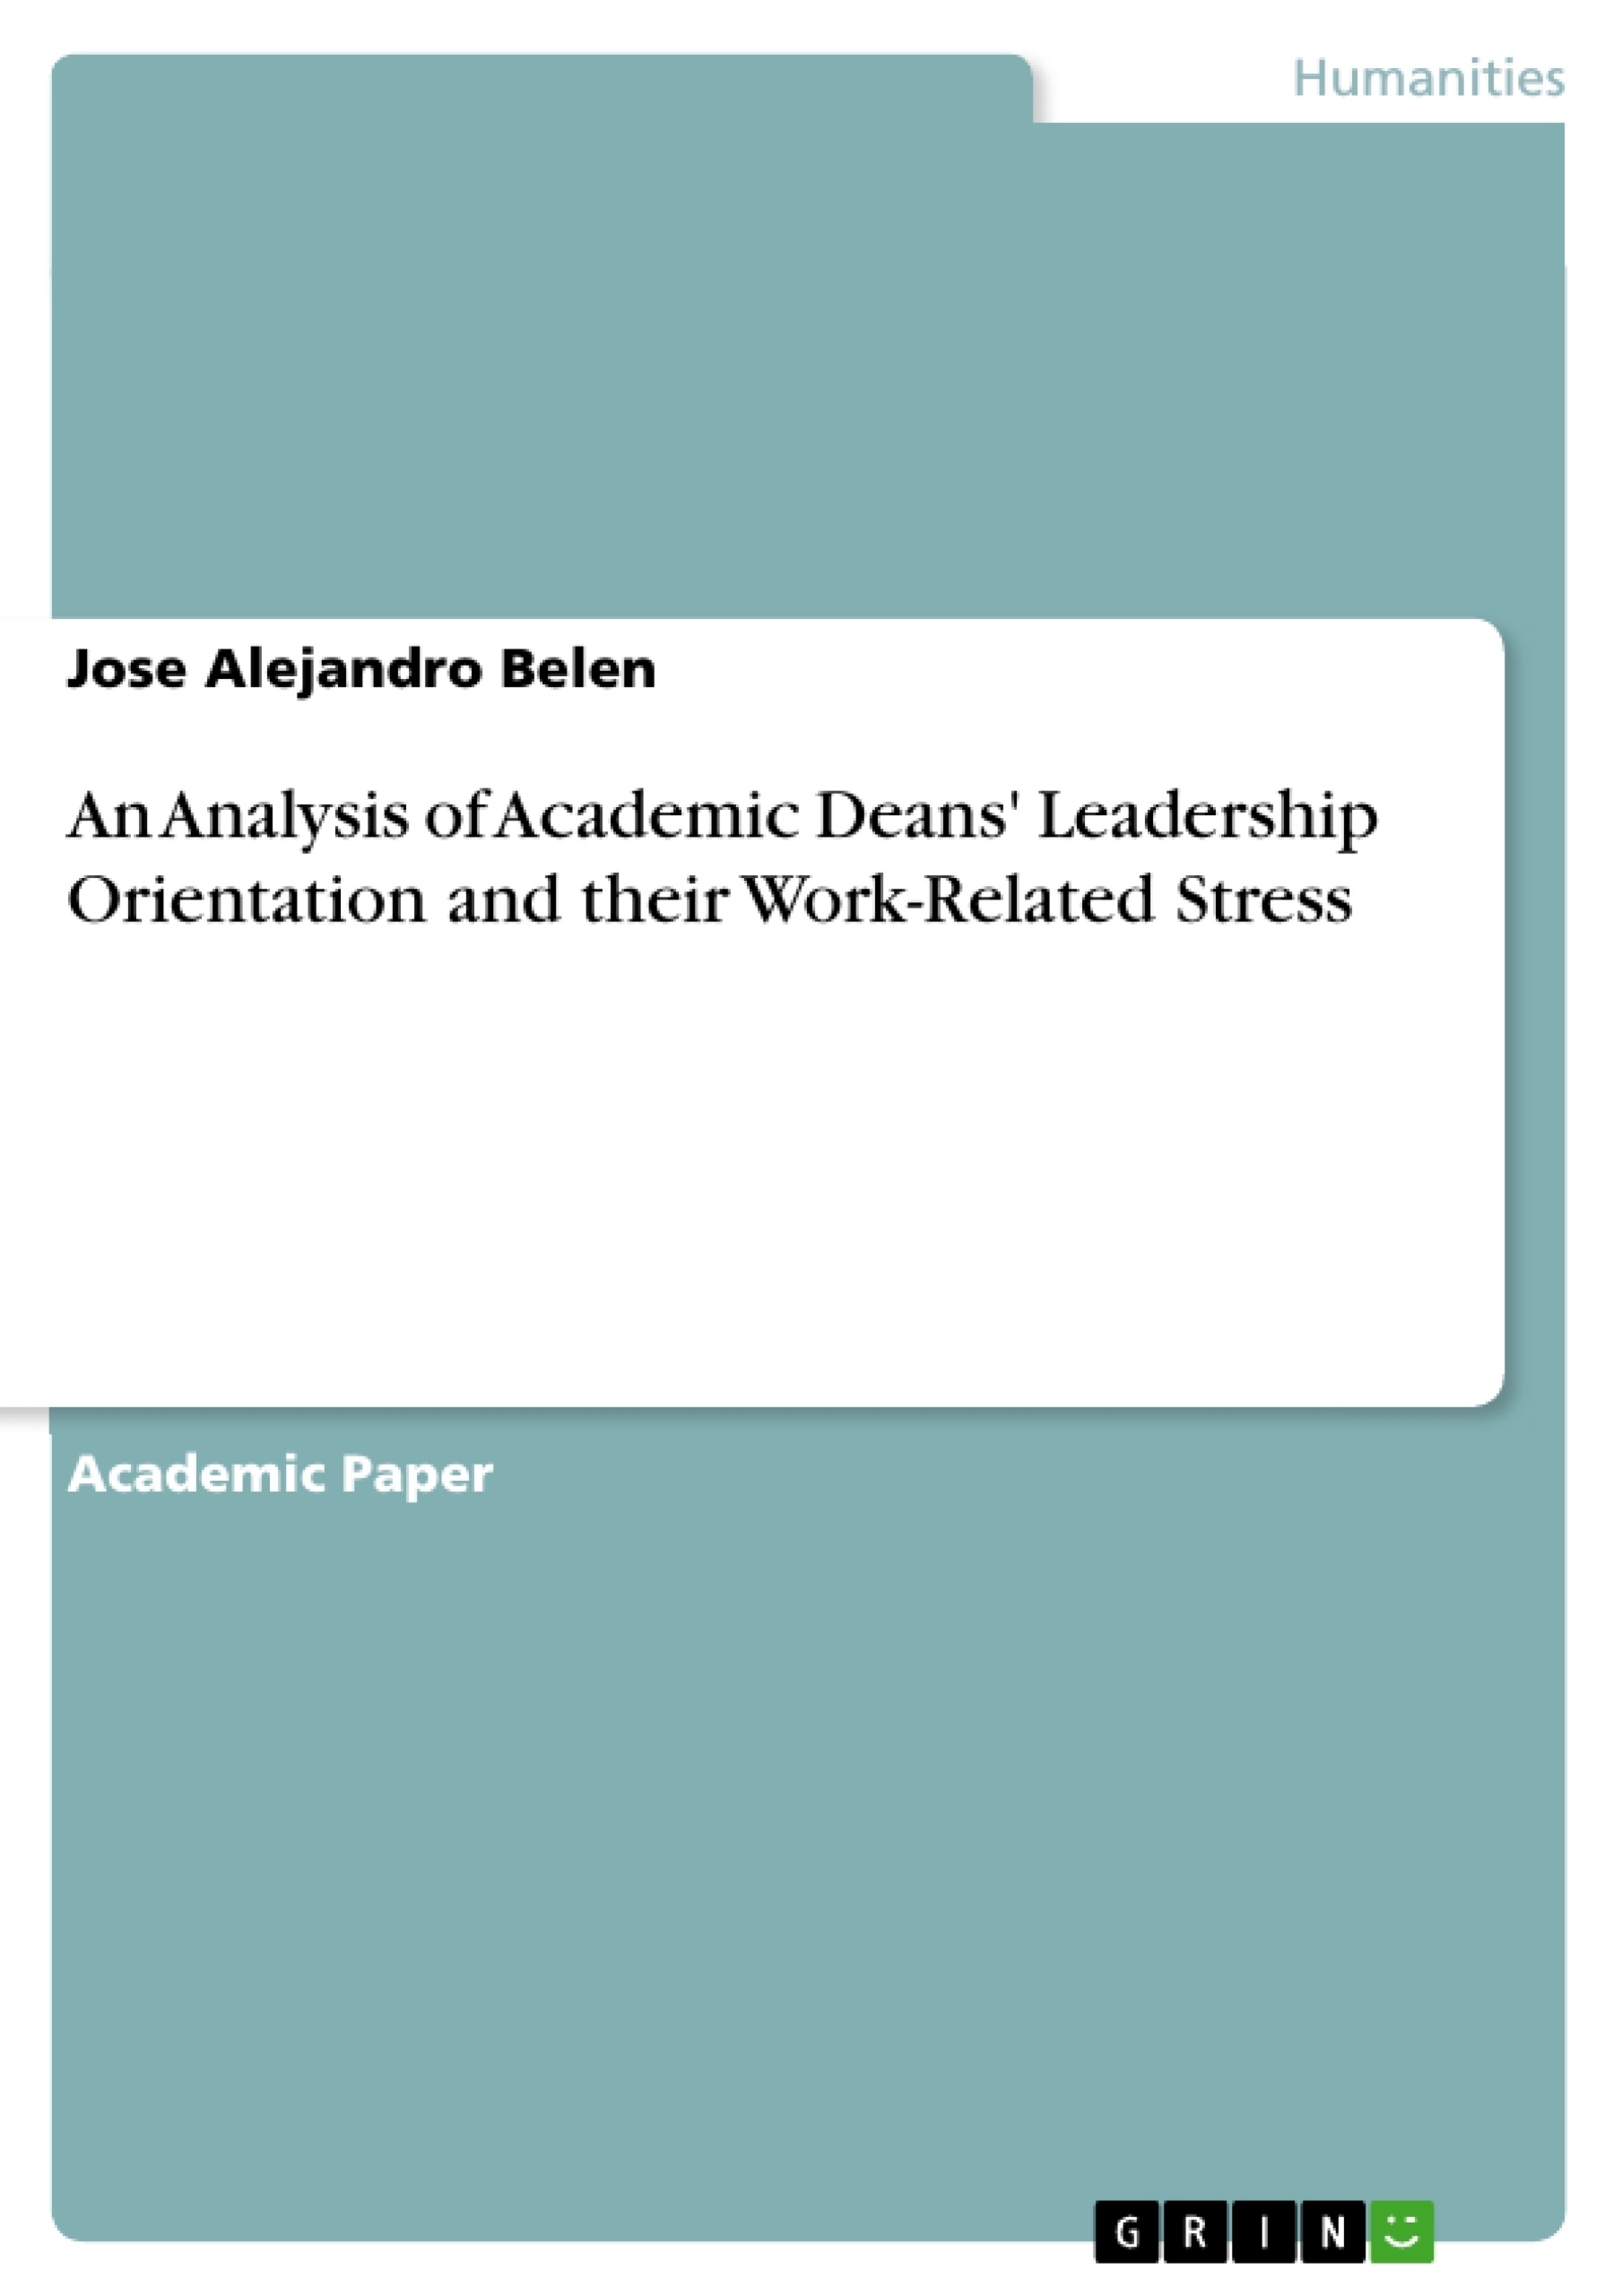 Title: An Analysis of Academic Deans' Leadership Orientation and their Work-Related Stress